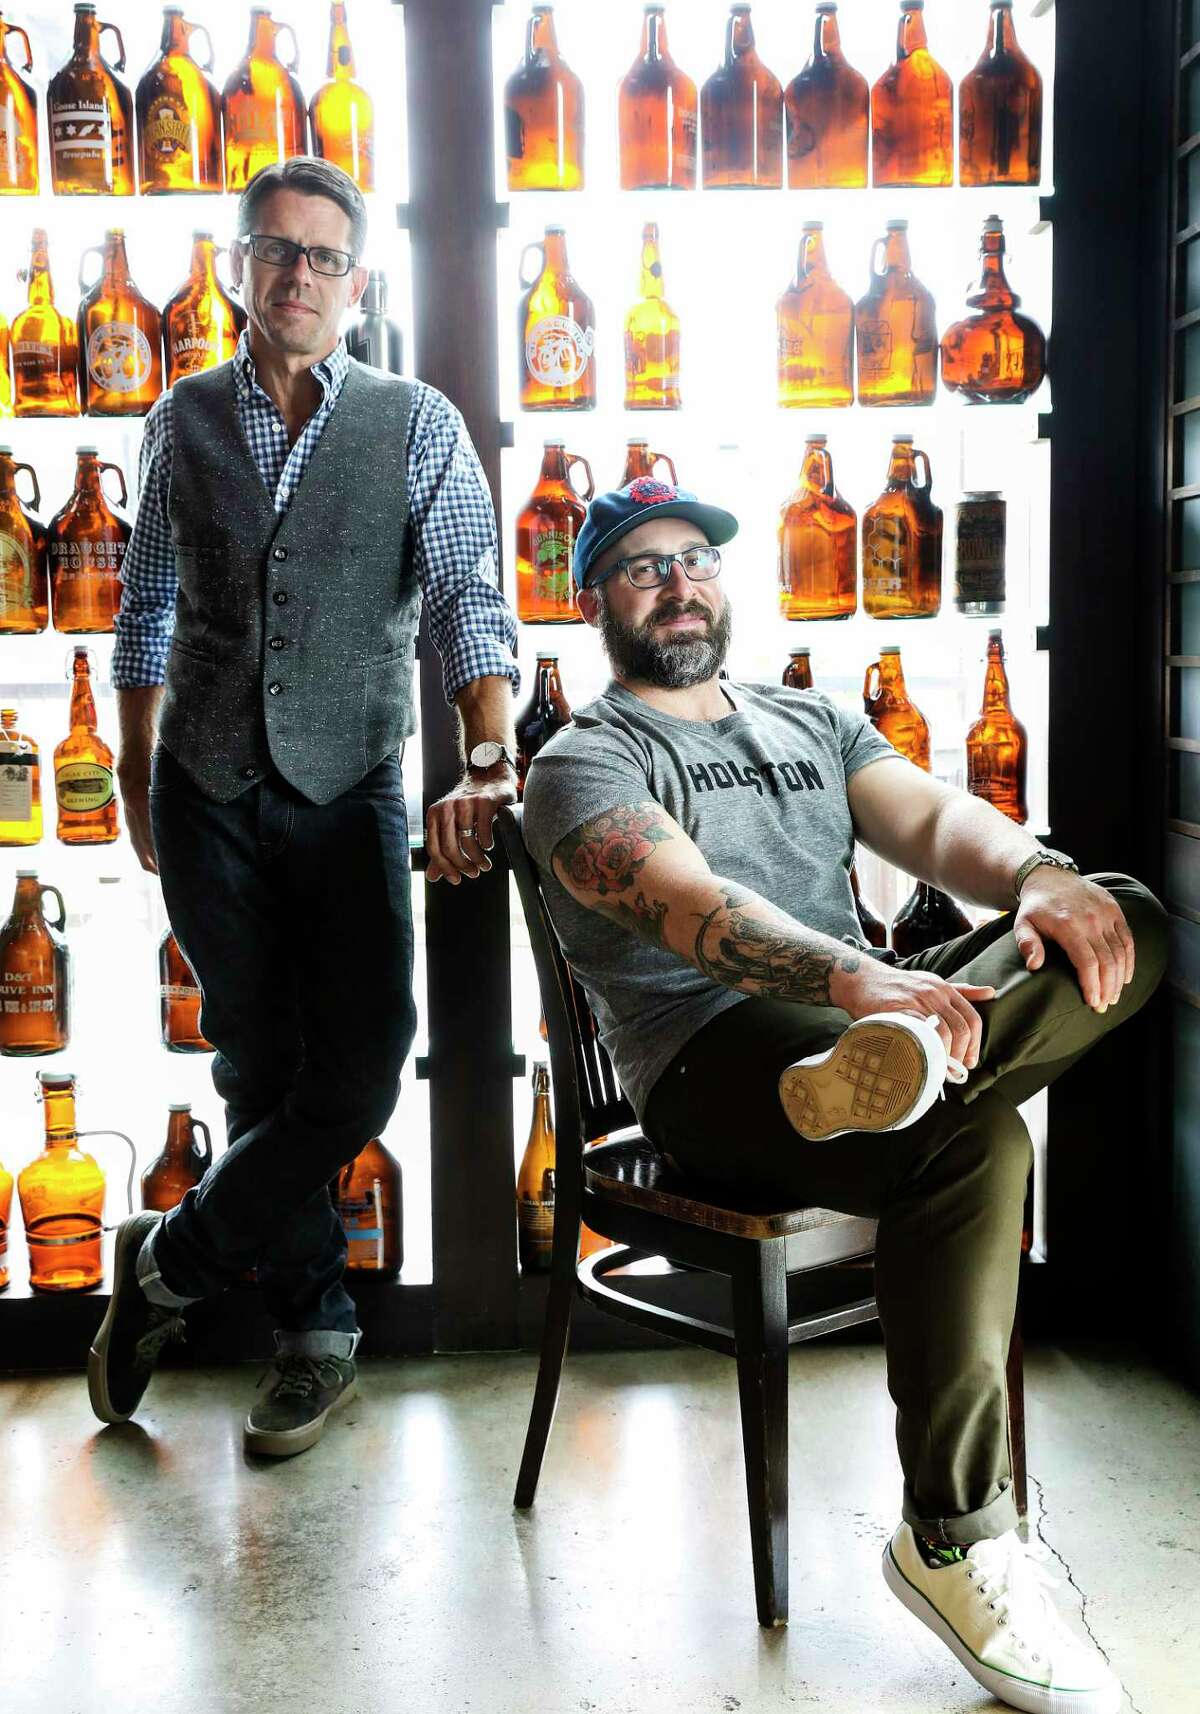 Matthew Pridgen, left, Hay Merchant and Underbelly wine director, and Seth Siegel-Gardner of The Pass & Provisions model mens casual outfits from STAG Provisions for Men at the Hay Merchant restaurant in anticipation of Chris Shepherd's Southern Smoke (Elizabeth Conley / Houston Chronicle )